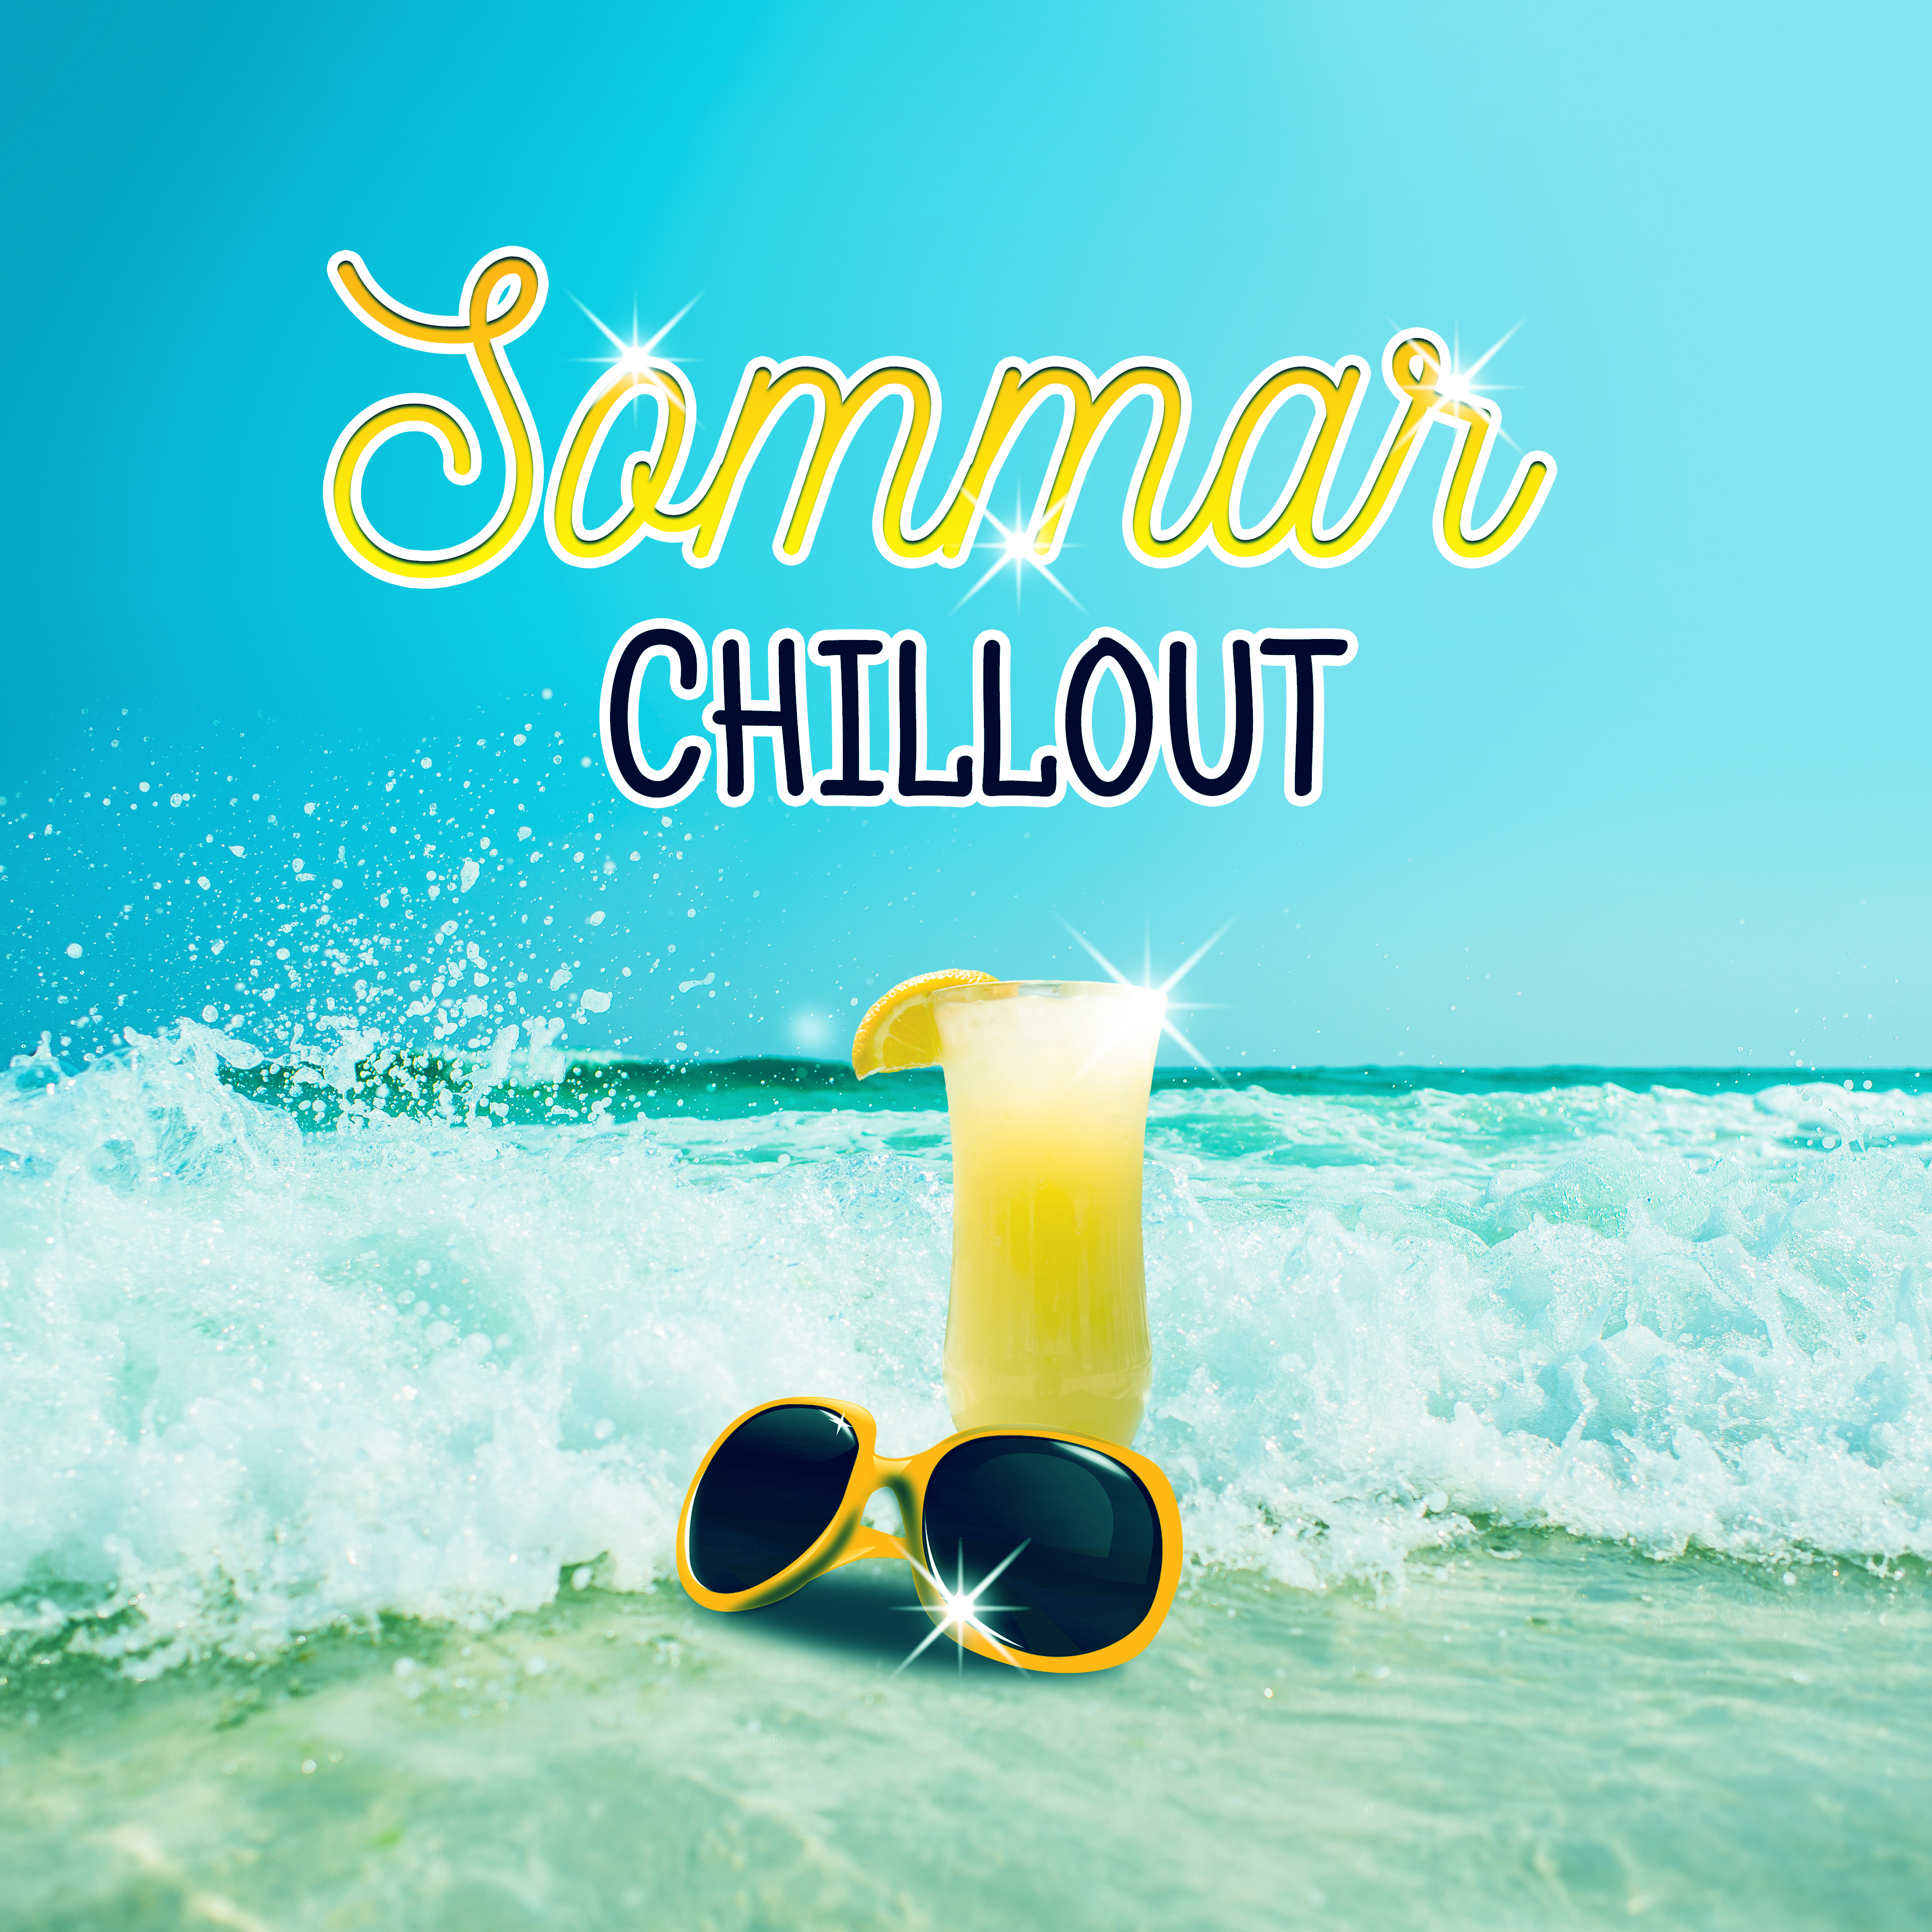 Sommar Chillout – Relax & Chill, Best of Chillout 2017, Beach Music, Dance